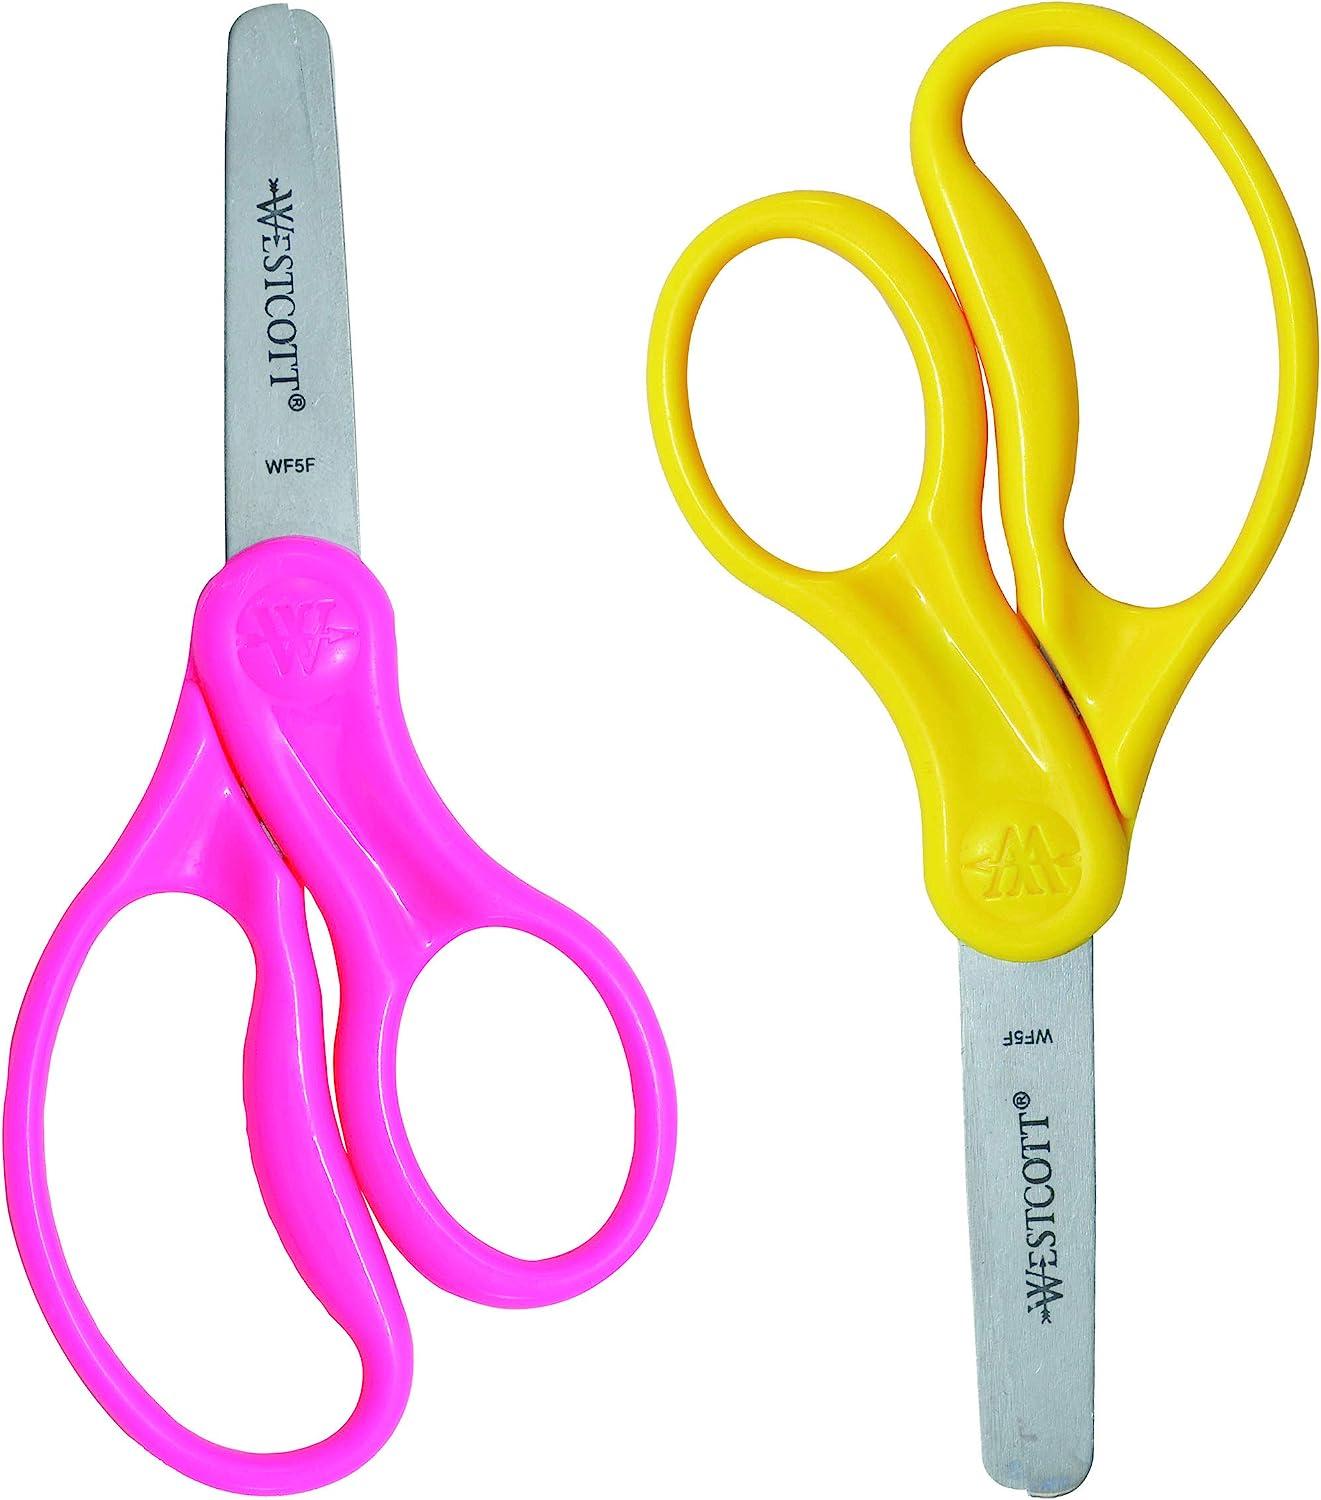 Westcott 13168 Right- and Left-Handed Scissors, Kids' Scissors, Ages 4-8,  5-Inch Blunt Tip, Assorted, 2 Pack